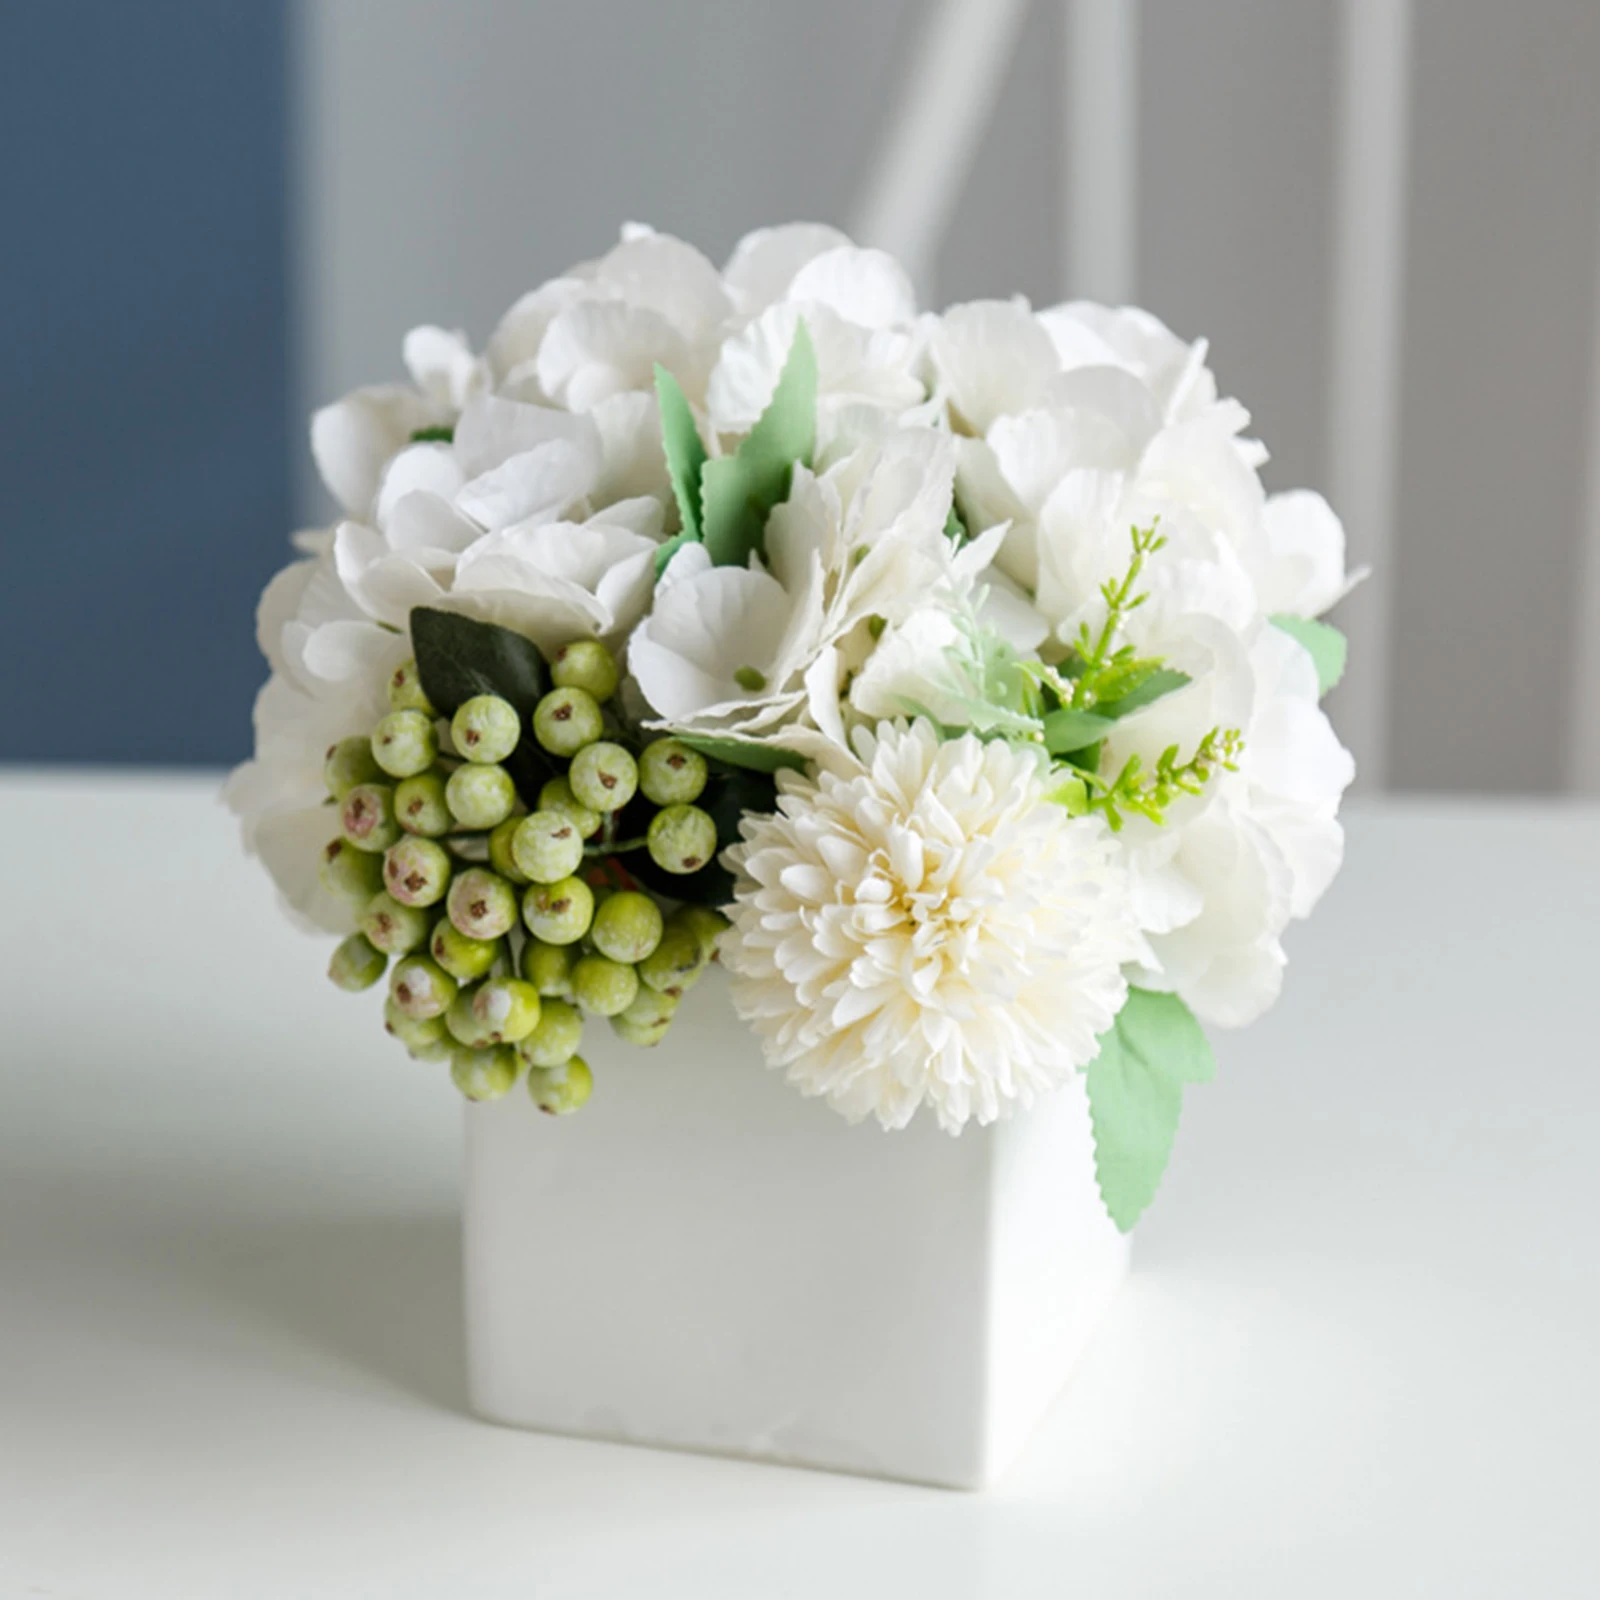 Artificial Flowers Hydrangea With Ceramic Vase Silk Potted Flower Home Decor